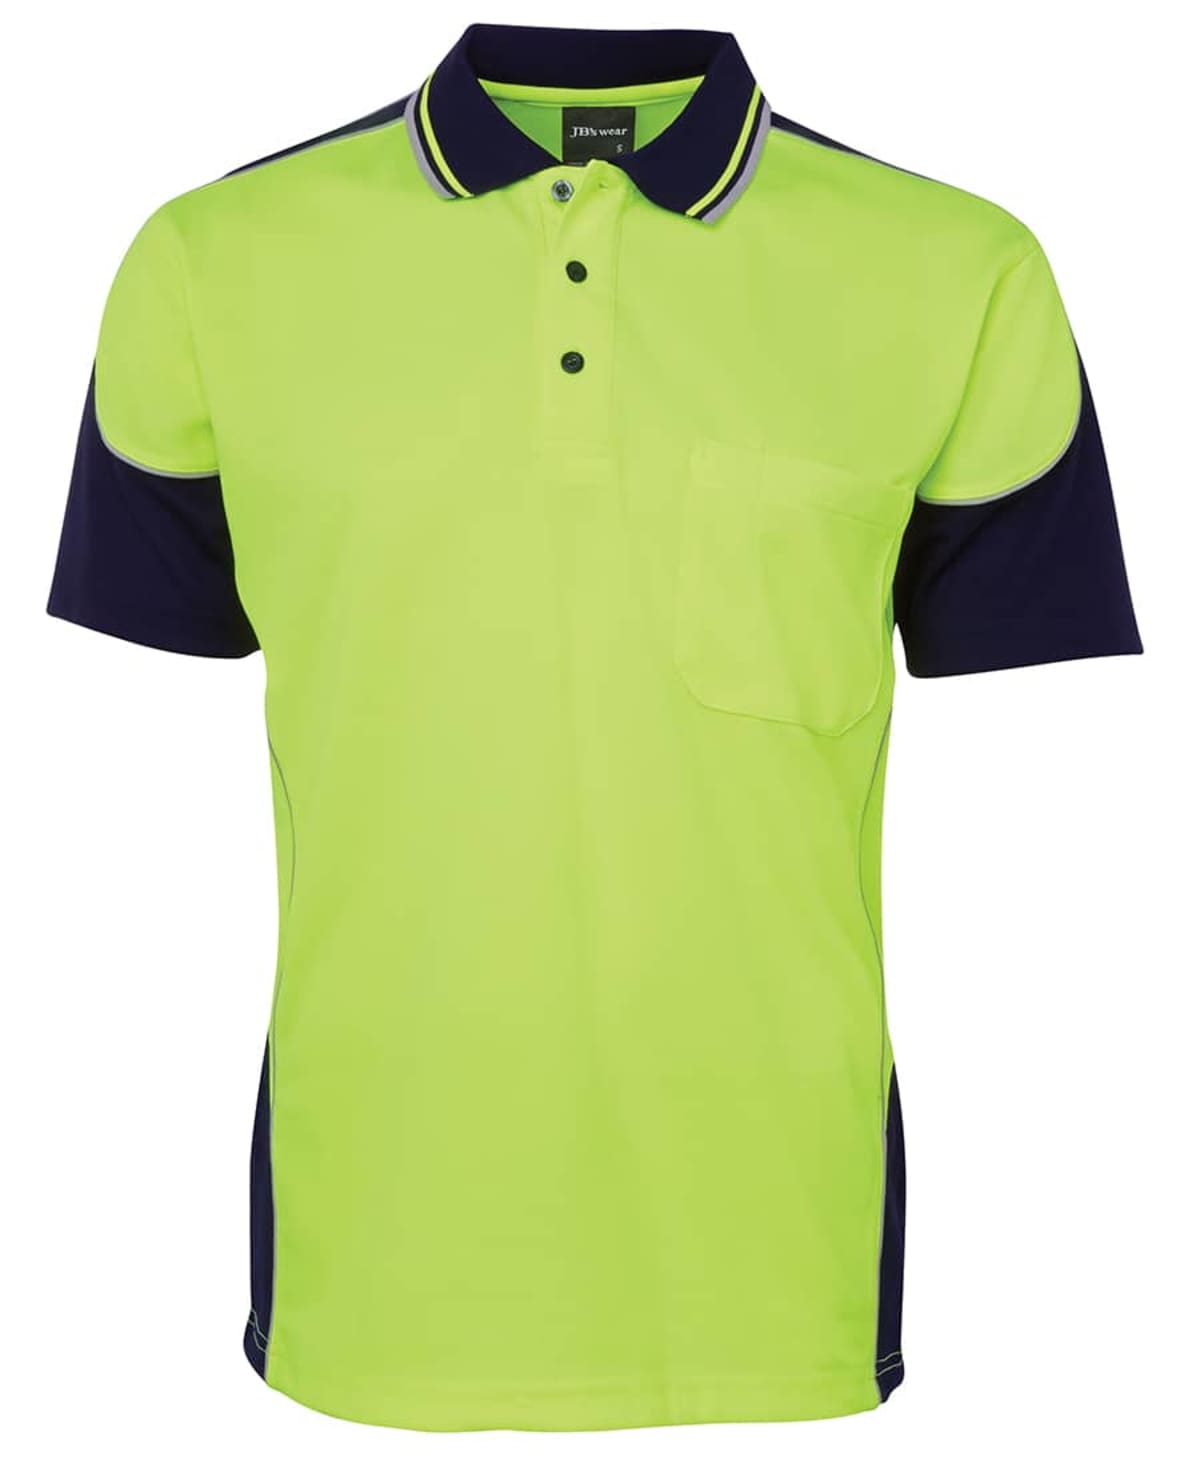 JB's Hi Vis Contrast Piping Polo